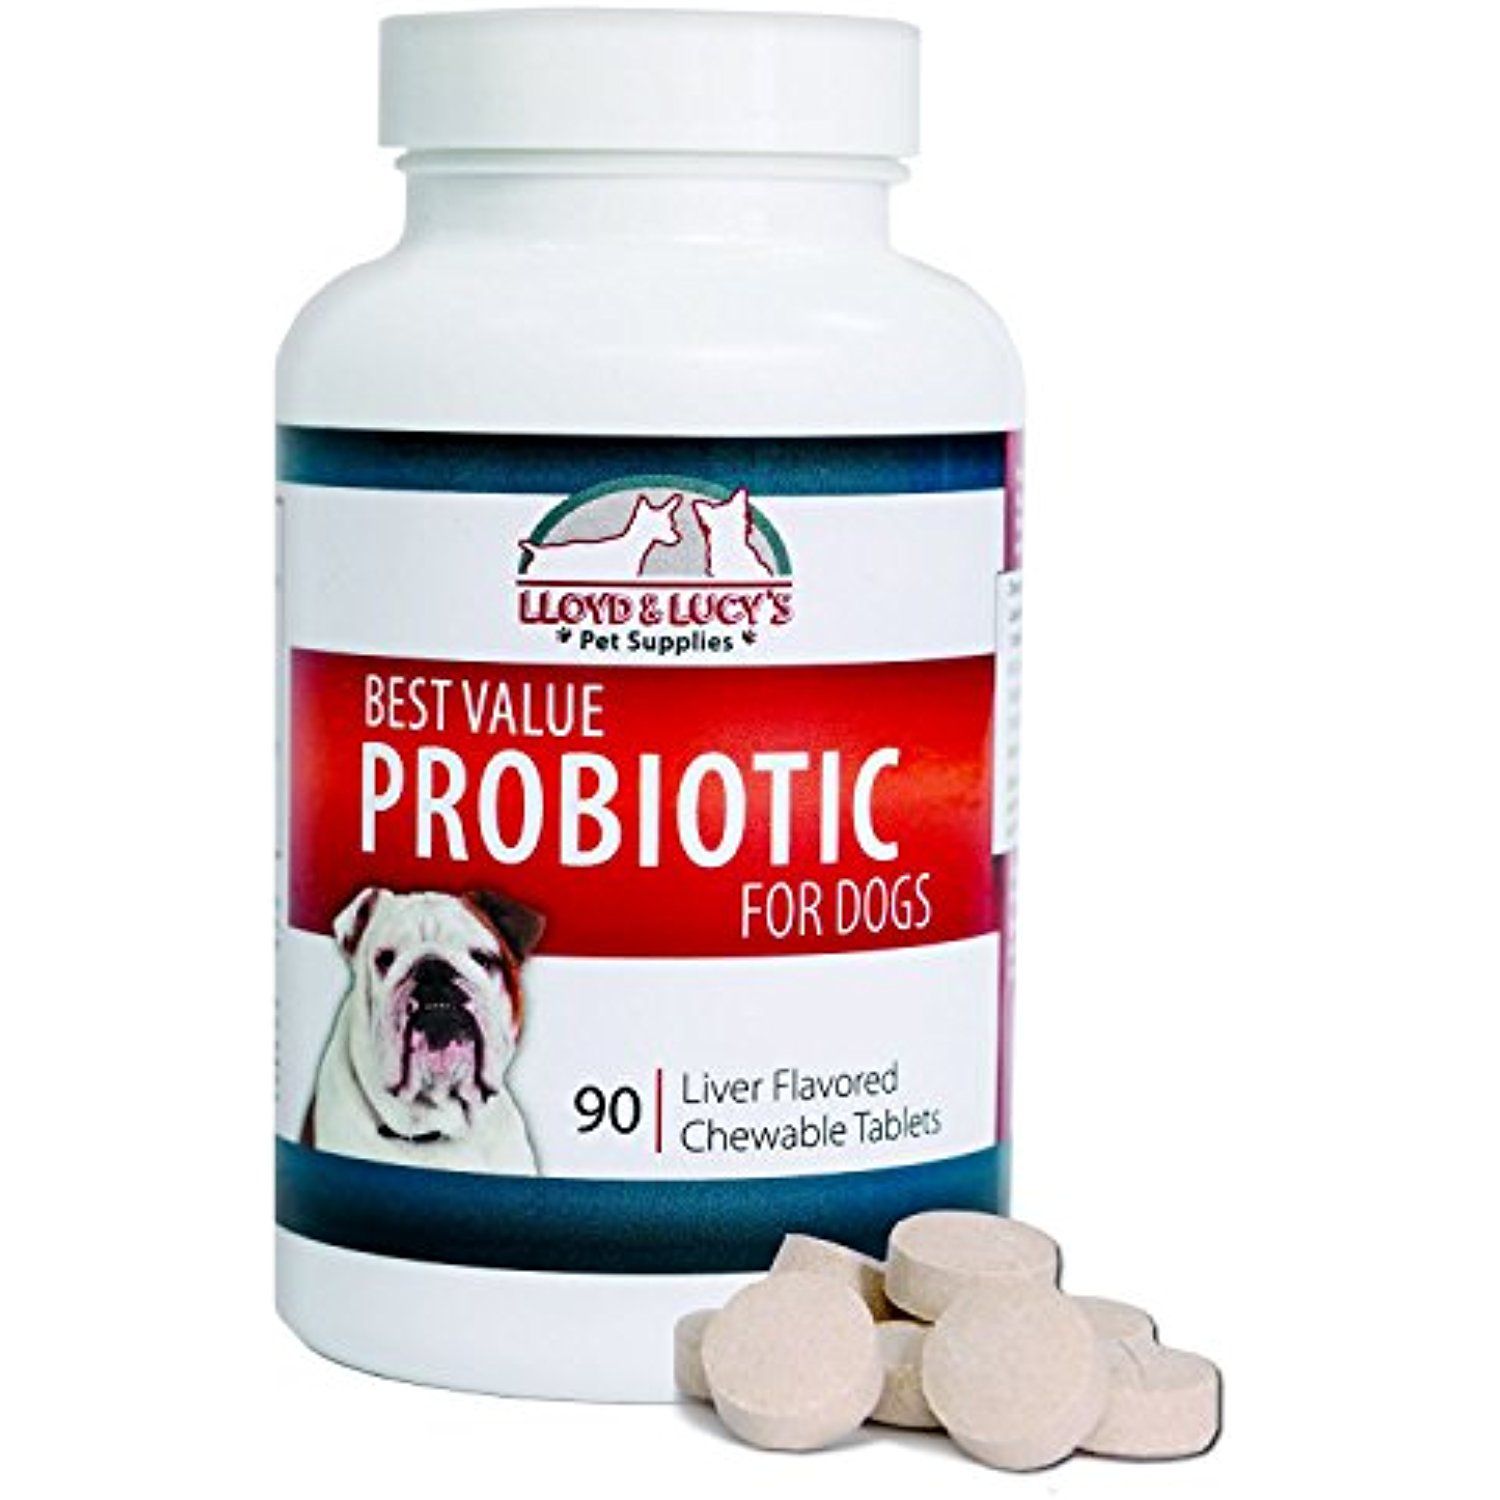 Best Value Probiotic for Dogs, 90 chewable tablets, 7 Beneficial ...